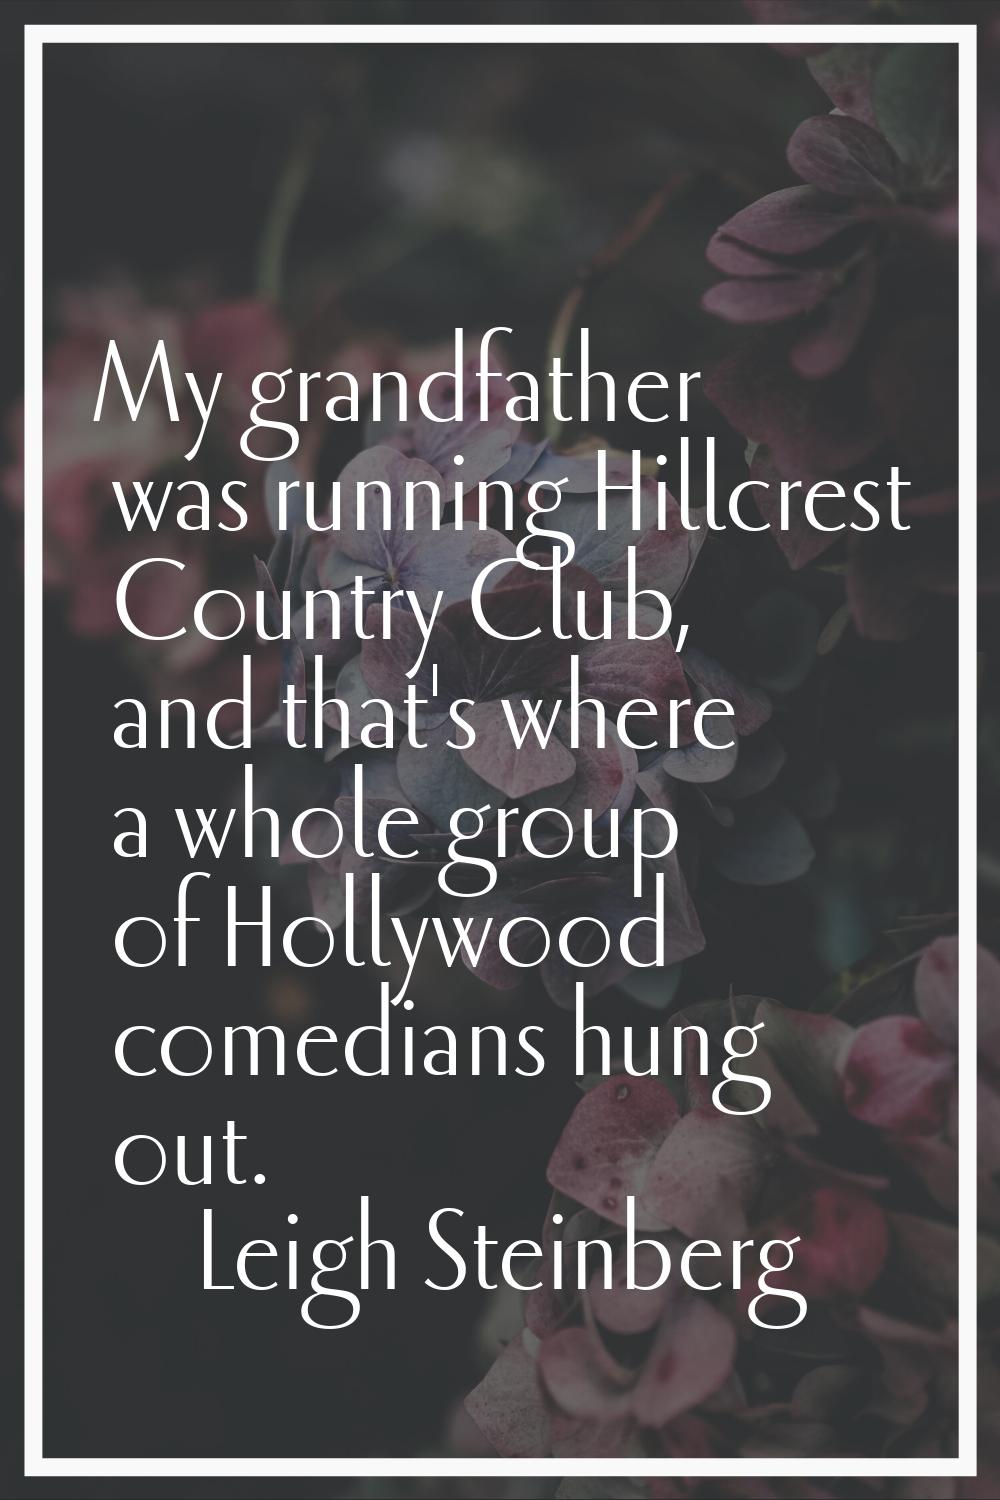 My grandfather was running Hillcrest Country Club, and that's where a whole group of Hollywood come